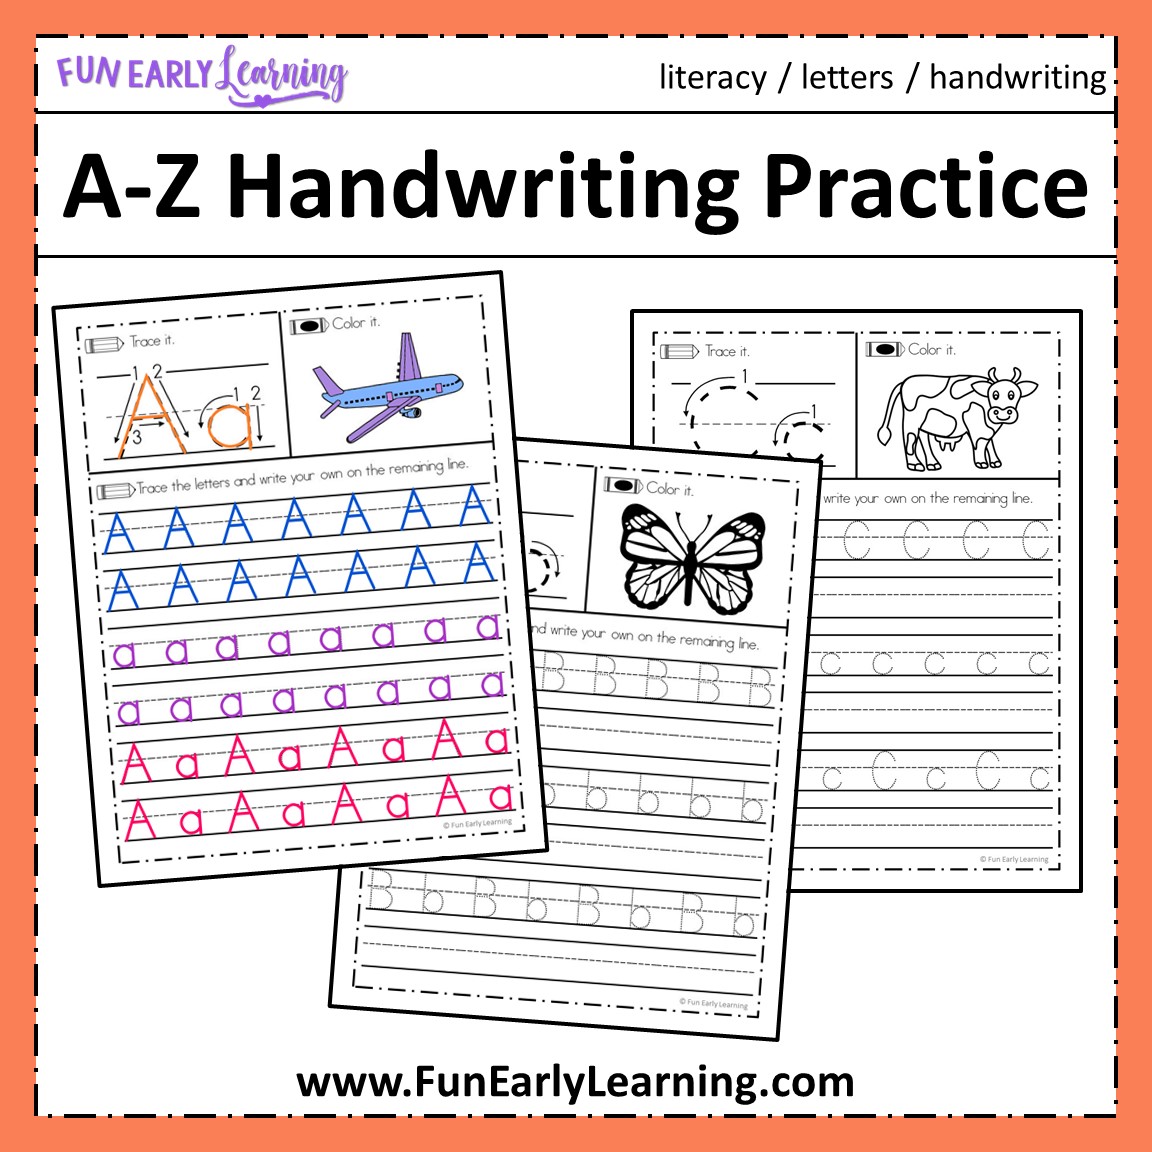 ABC Letter Tracing Practice Workbook for Kids: Learning to Write Alphabet, Numbers and Line Tracing. Handwriting Activity Book for Preschoolers, Kindergartens [Book]